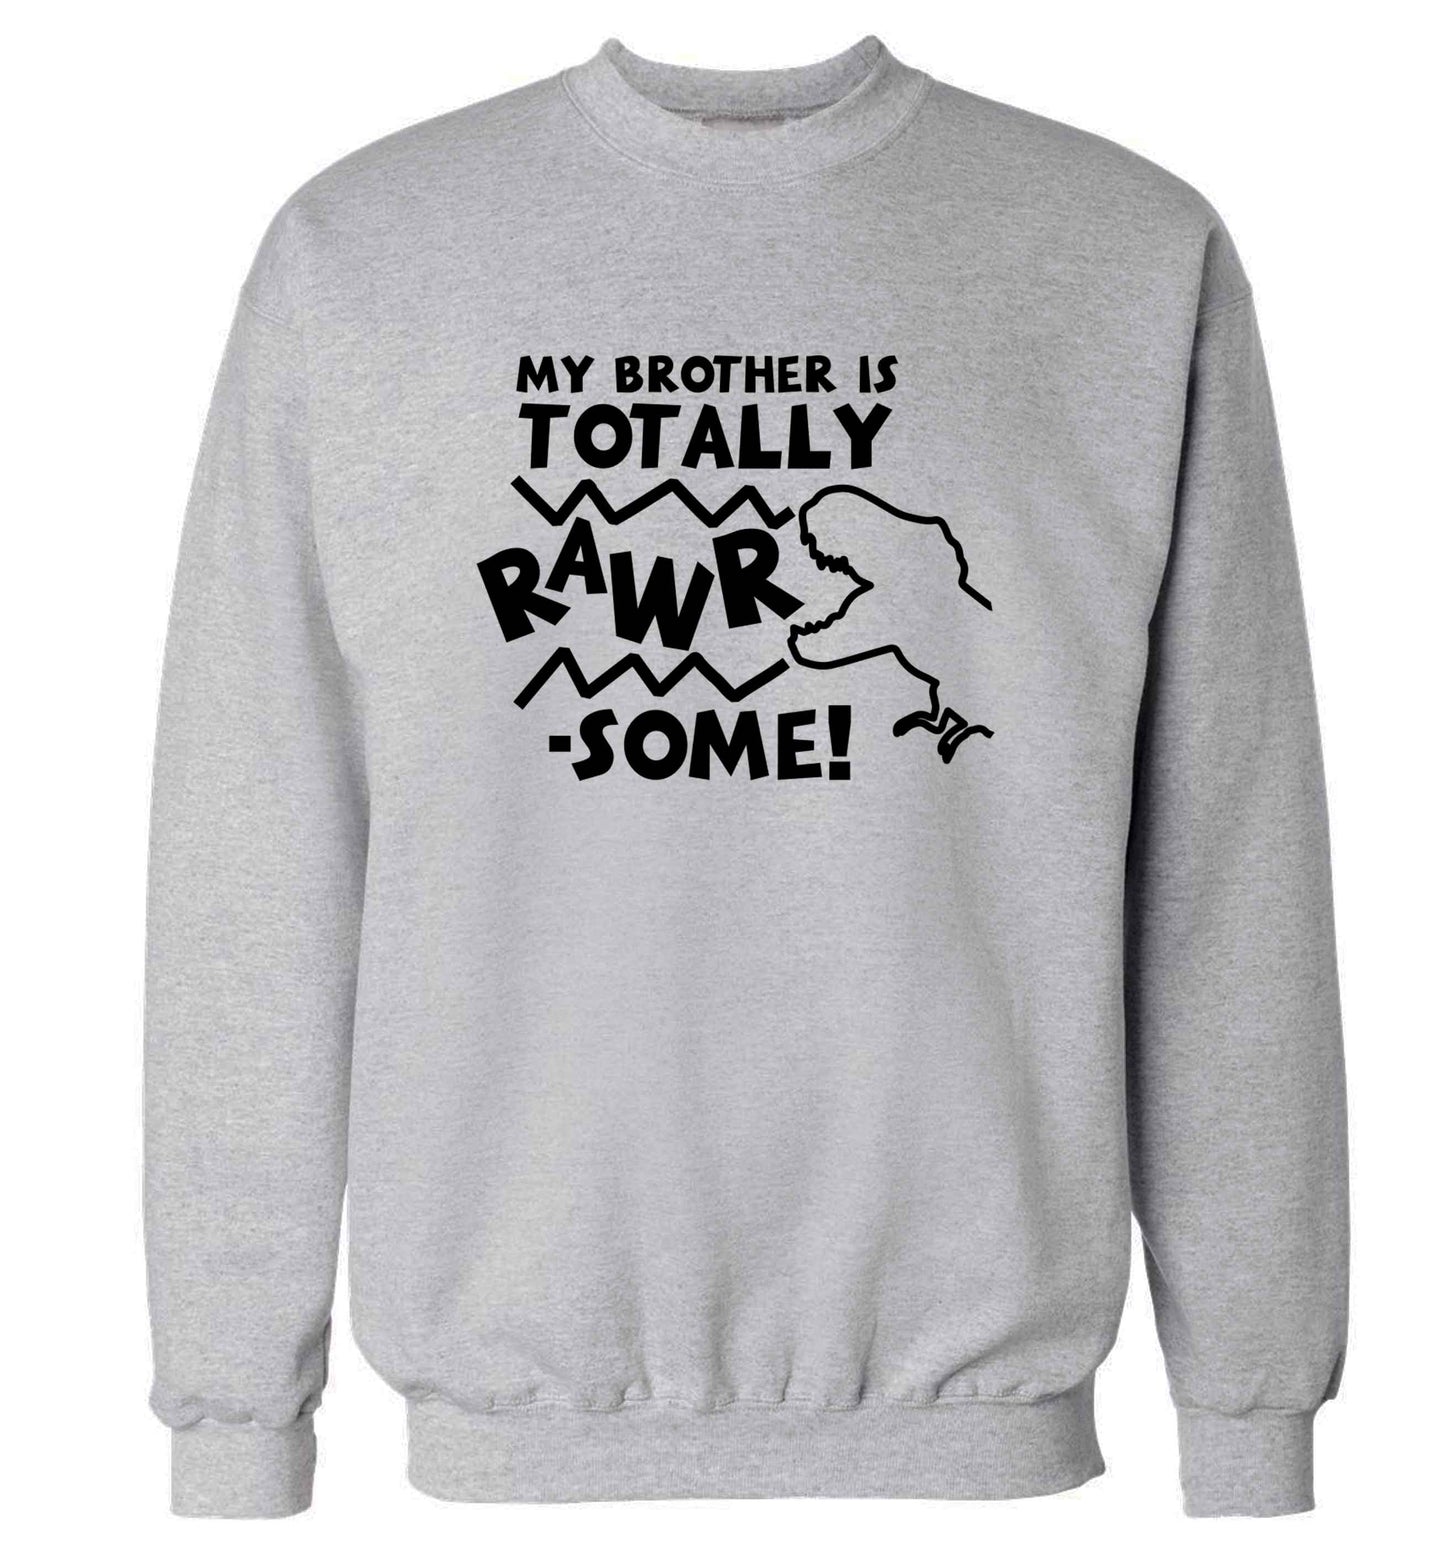 My brother is totally rawrsome adult's unisex grey sweater 2XL